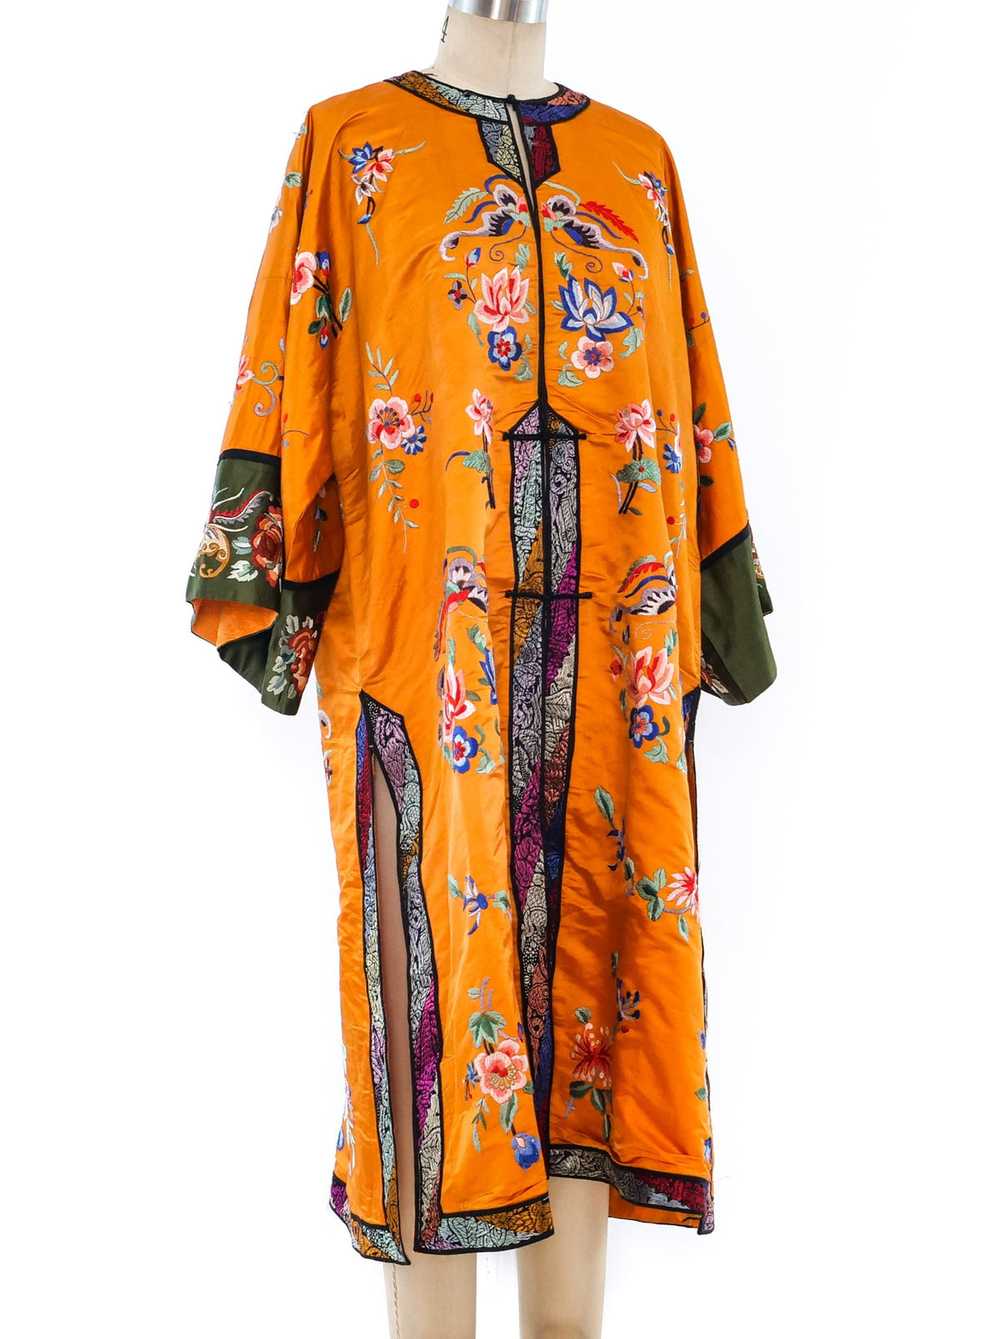 Embroidered Silk Chinese Jacket - image 4